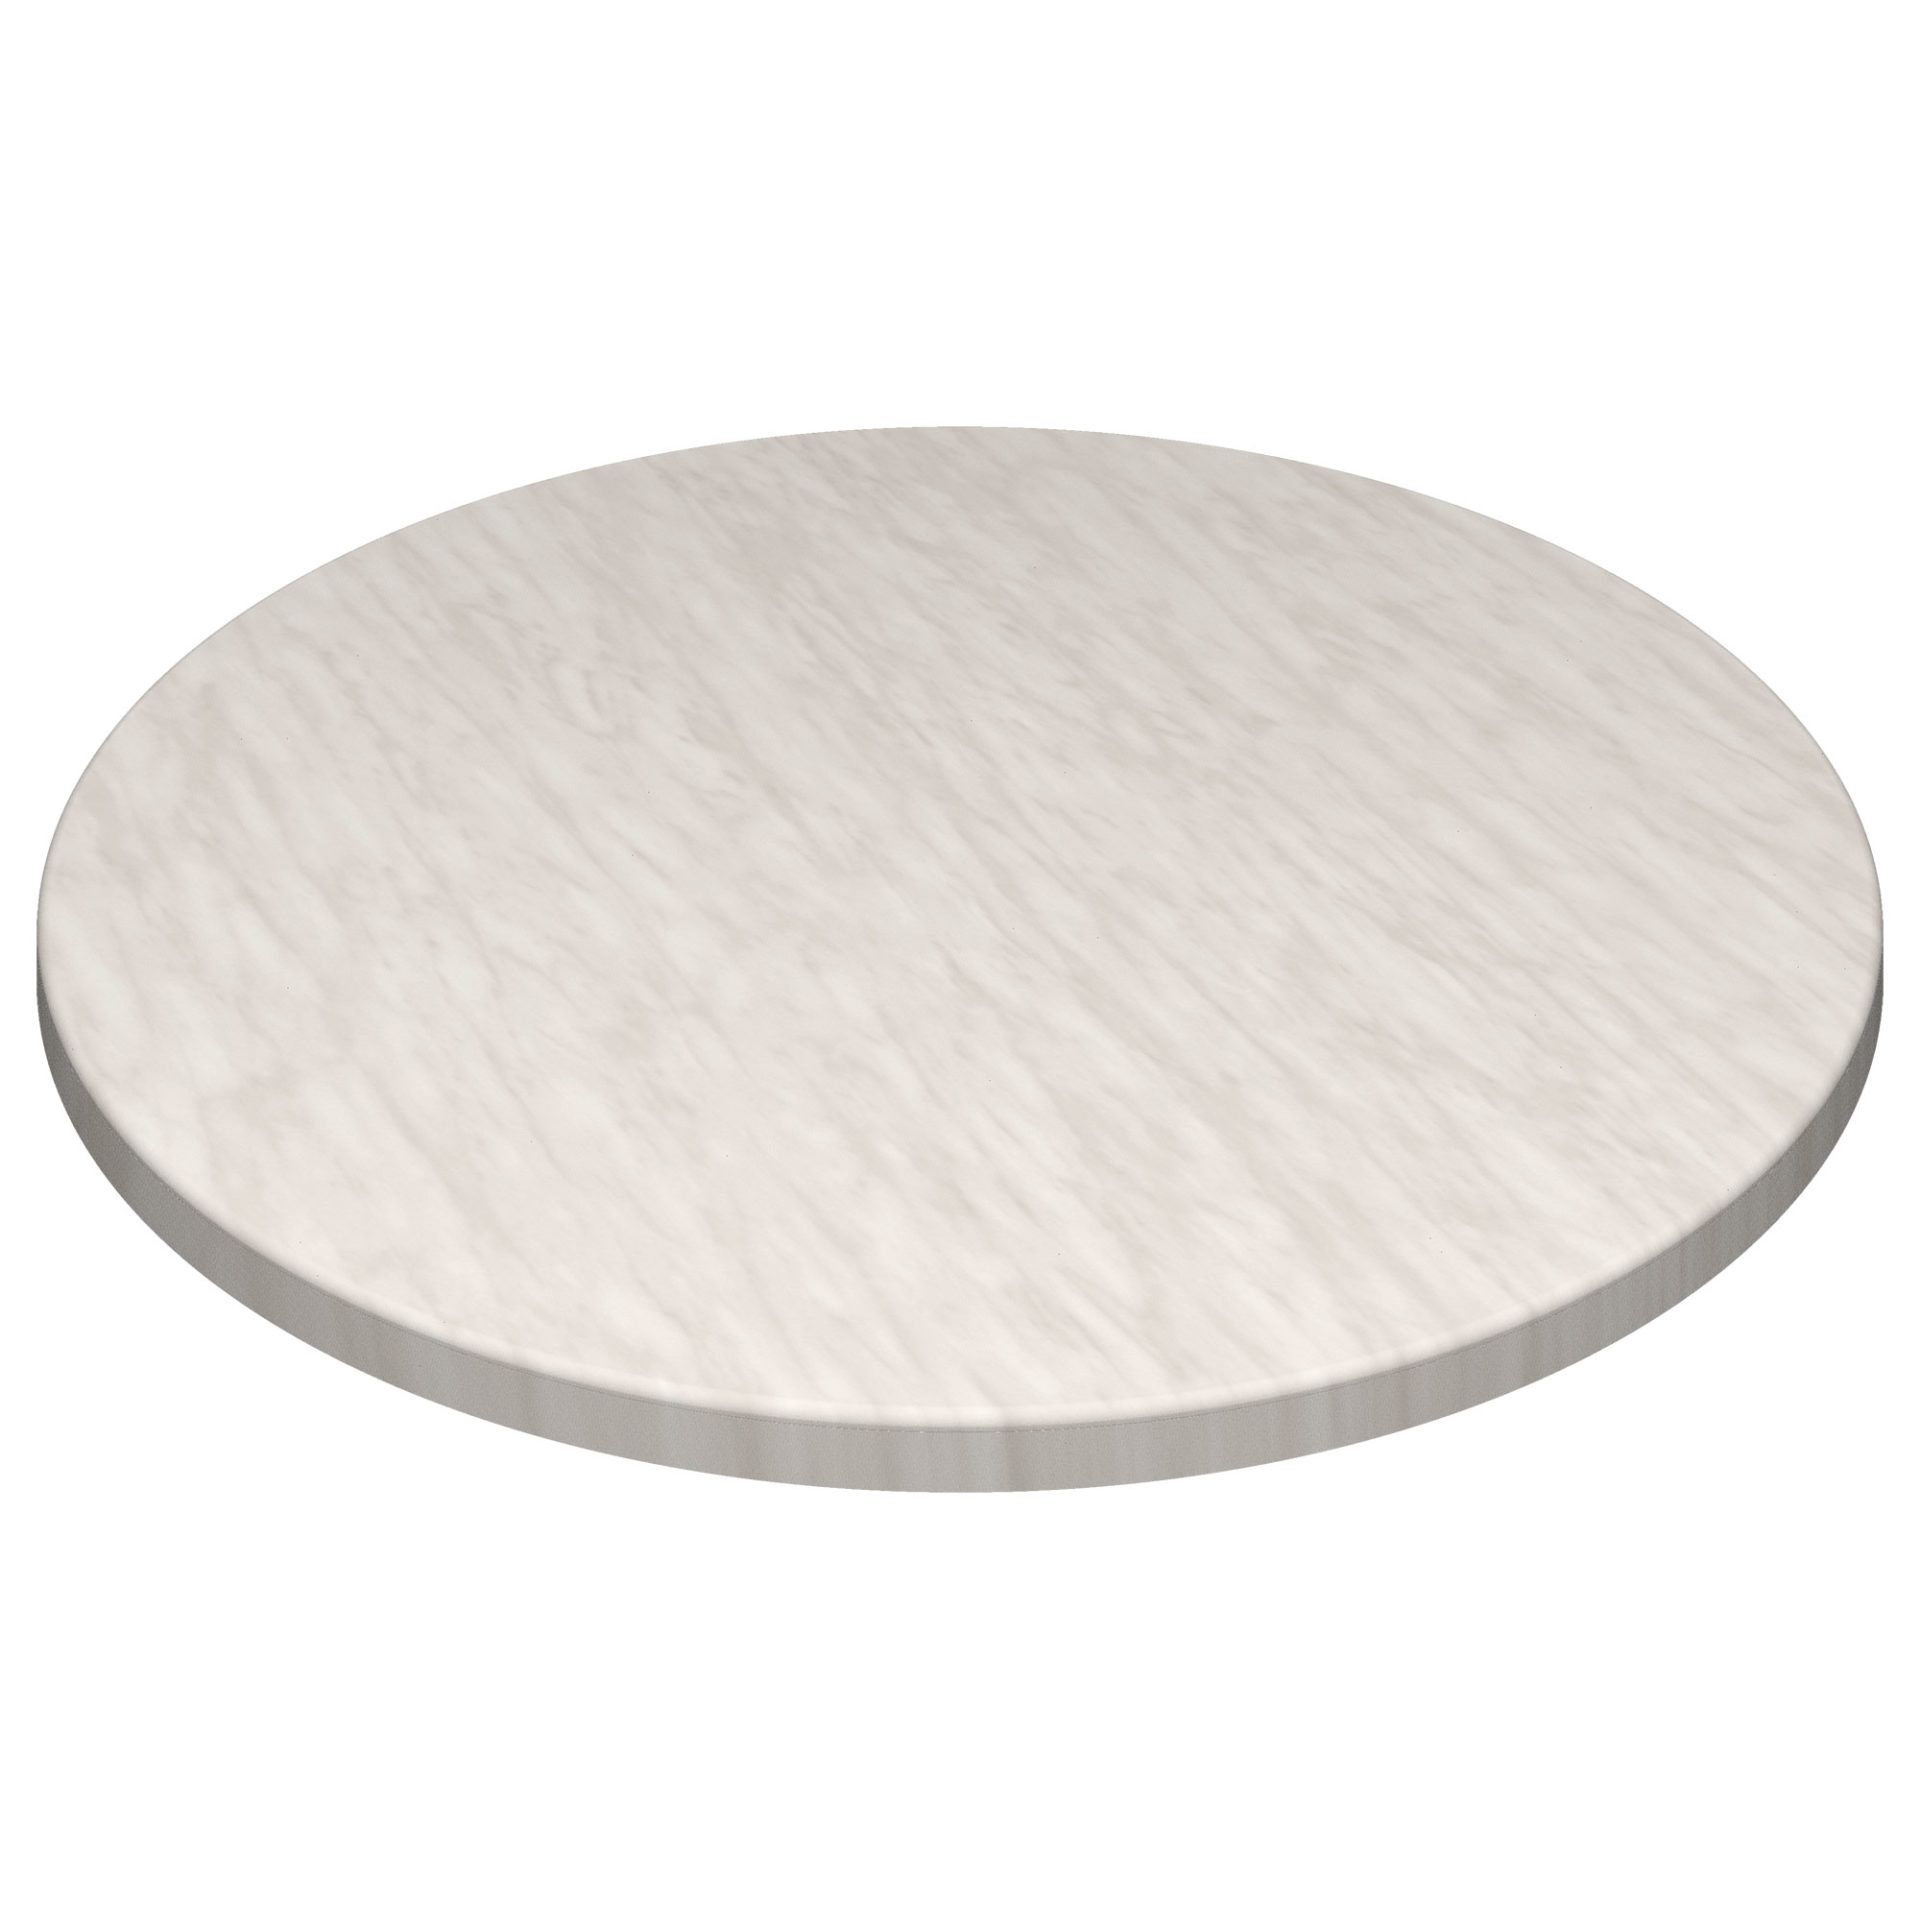 Werzalit Marble 800mm Diameter Duratop by SM France